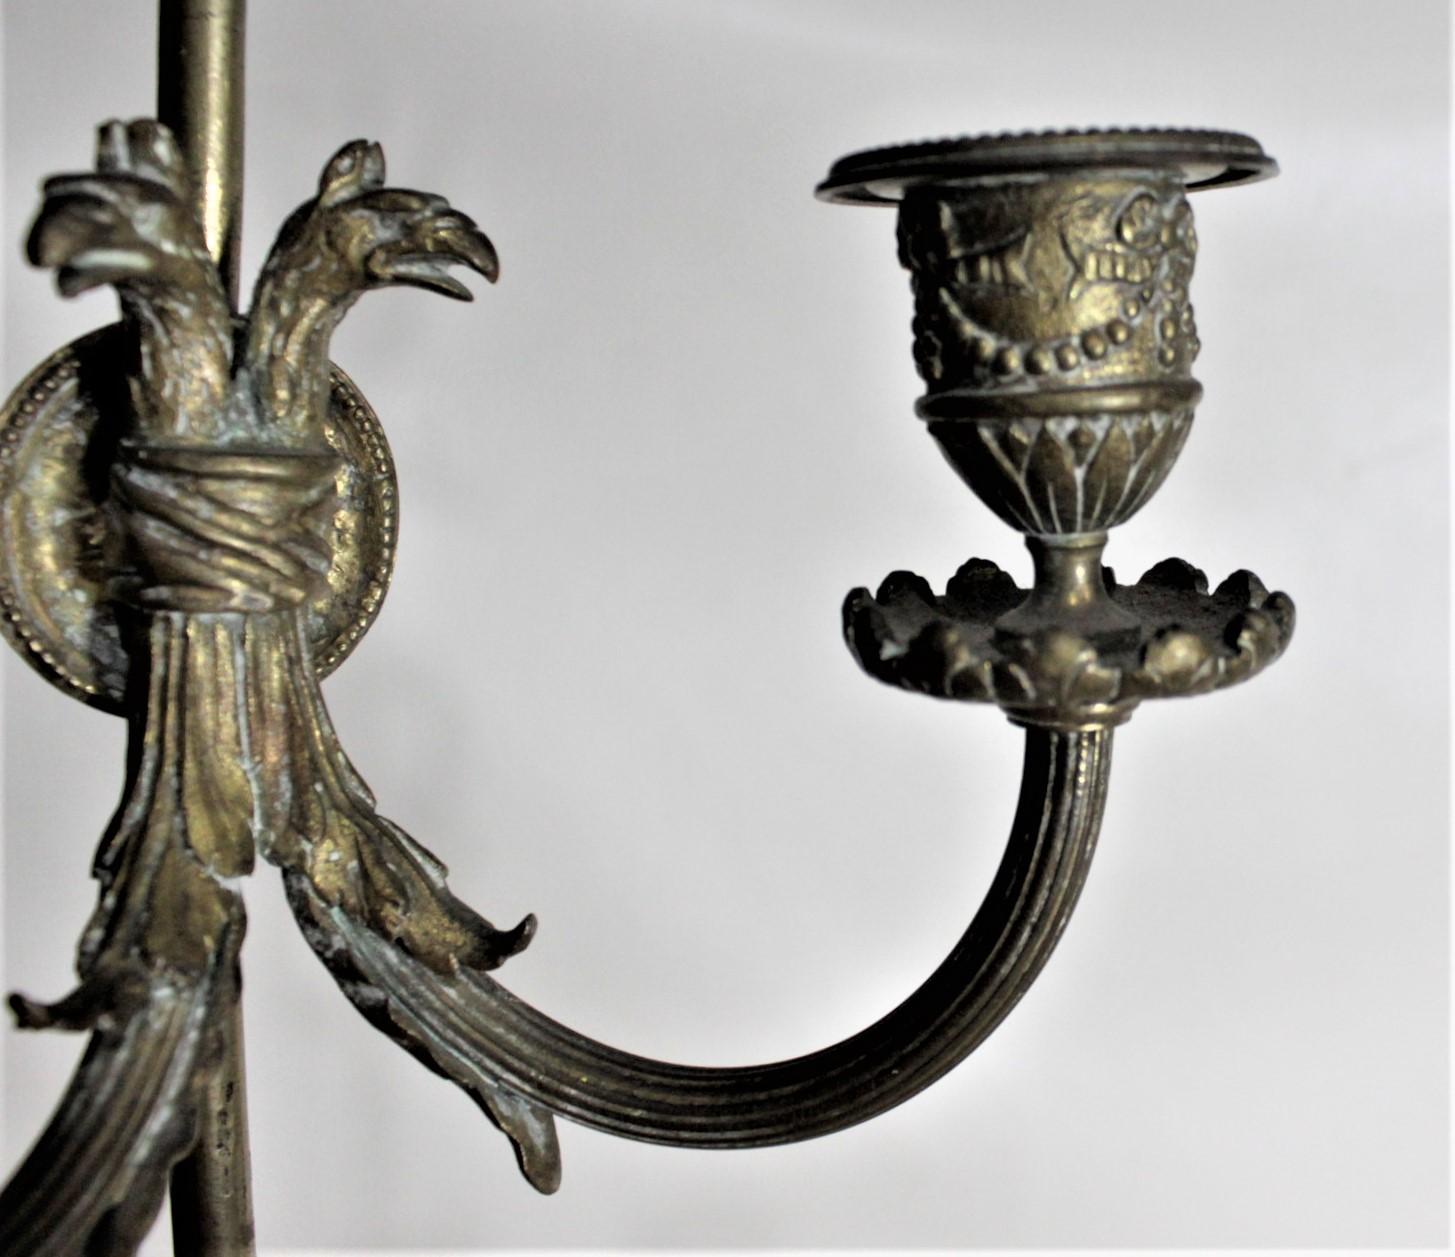 19th Century Pair of Ornate Antique Cast Bronze Wall Sconces / Candle Holders with Bird Motif